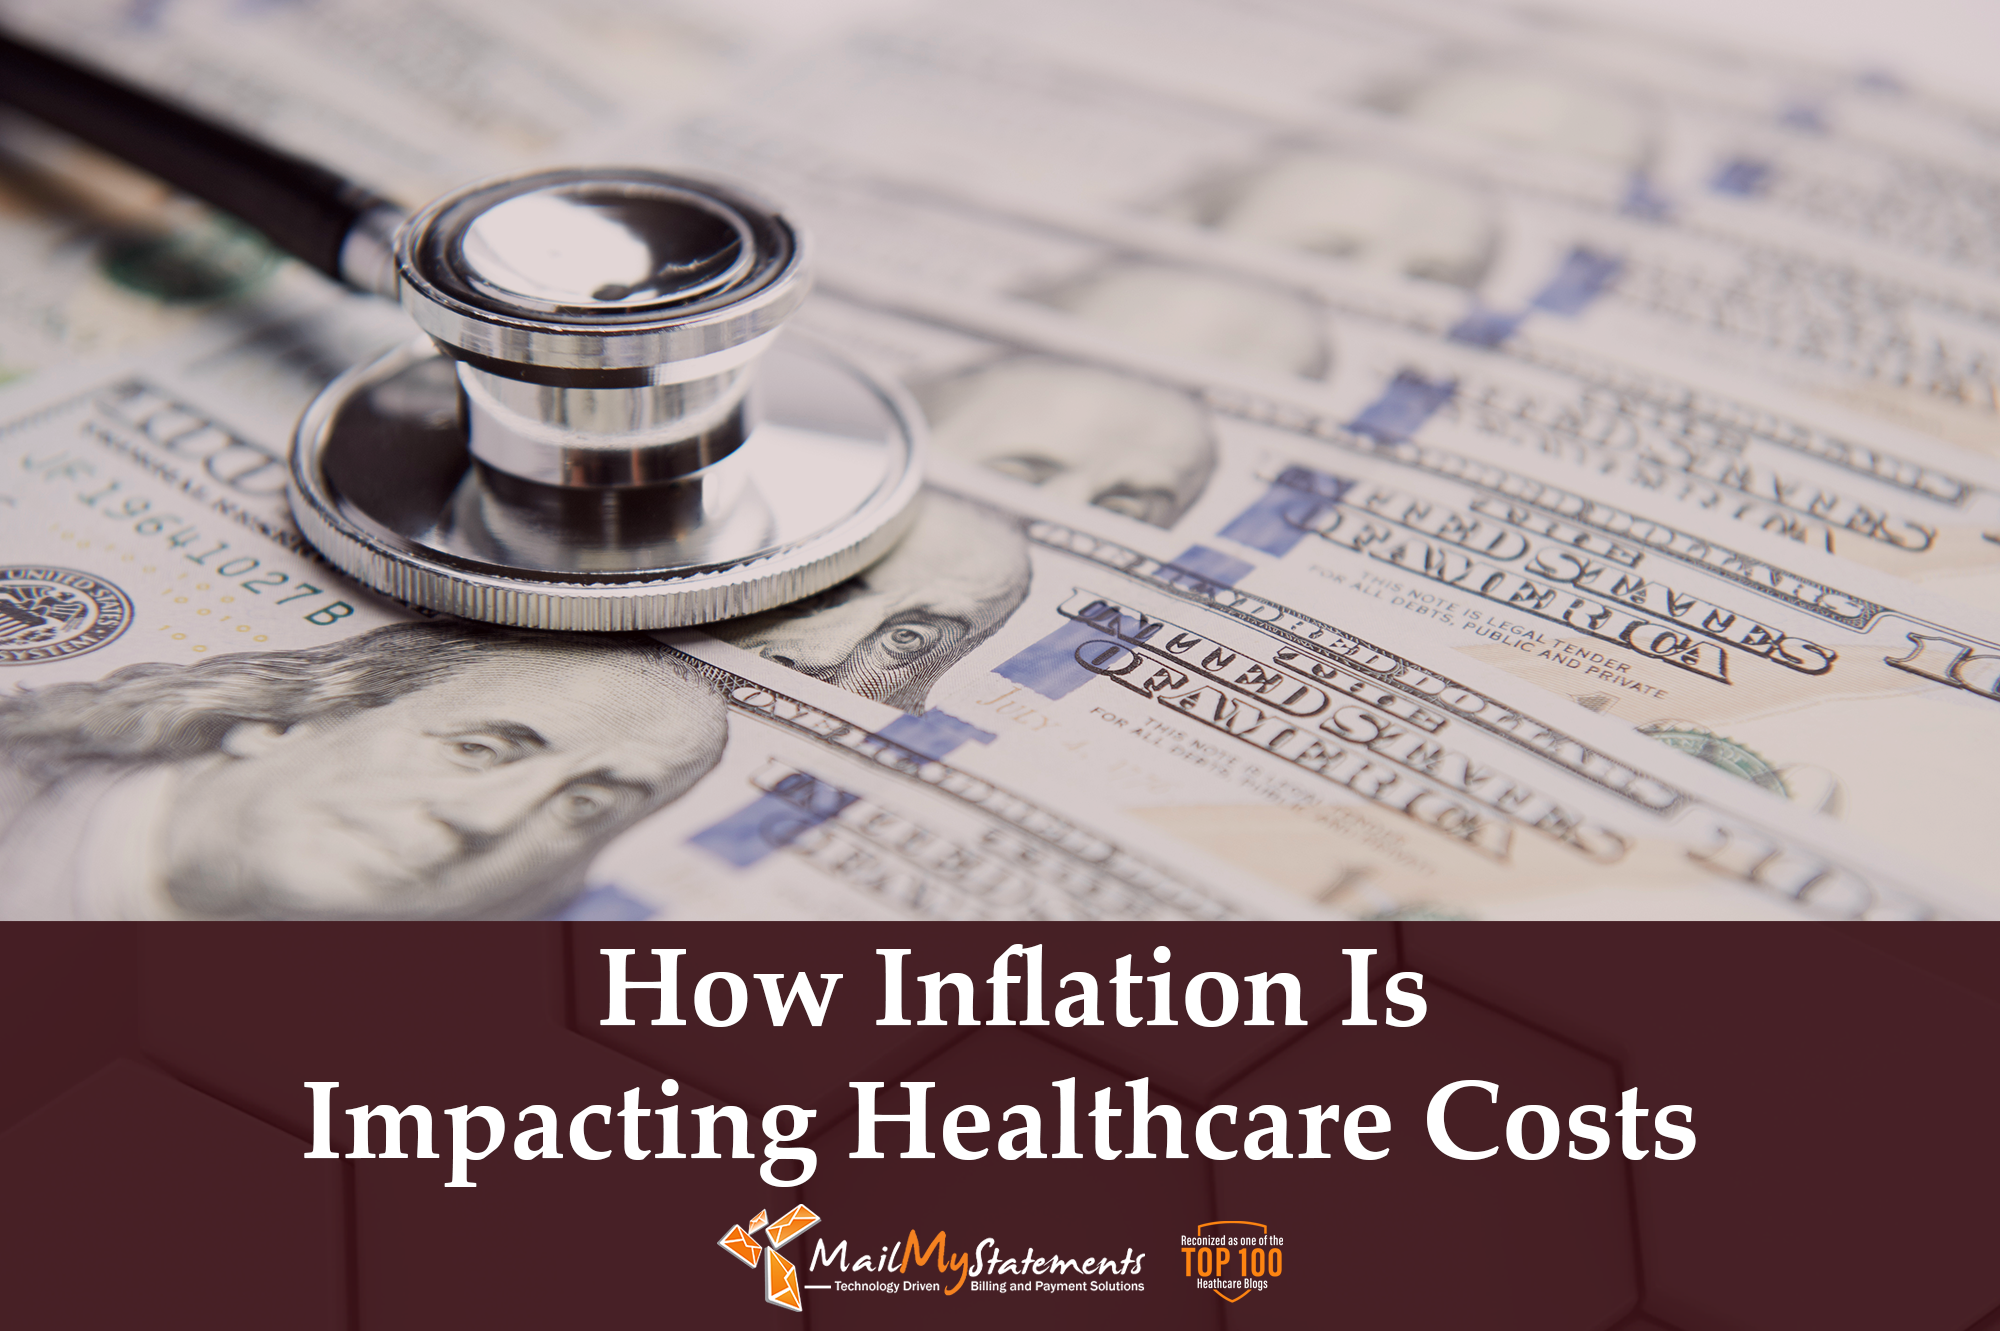 How Inflation Is Impacting Healthcare Costs